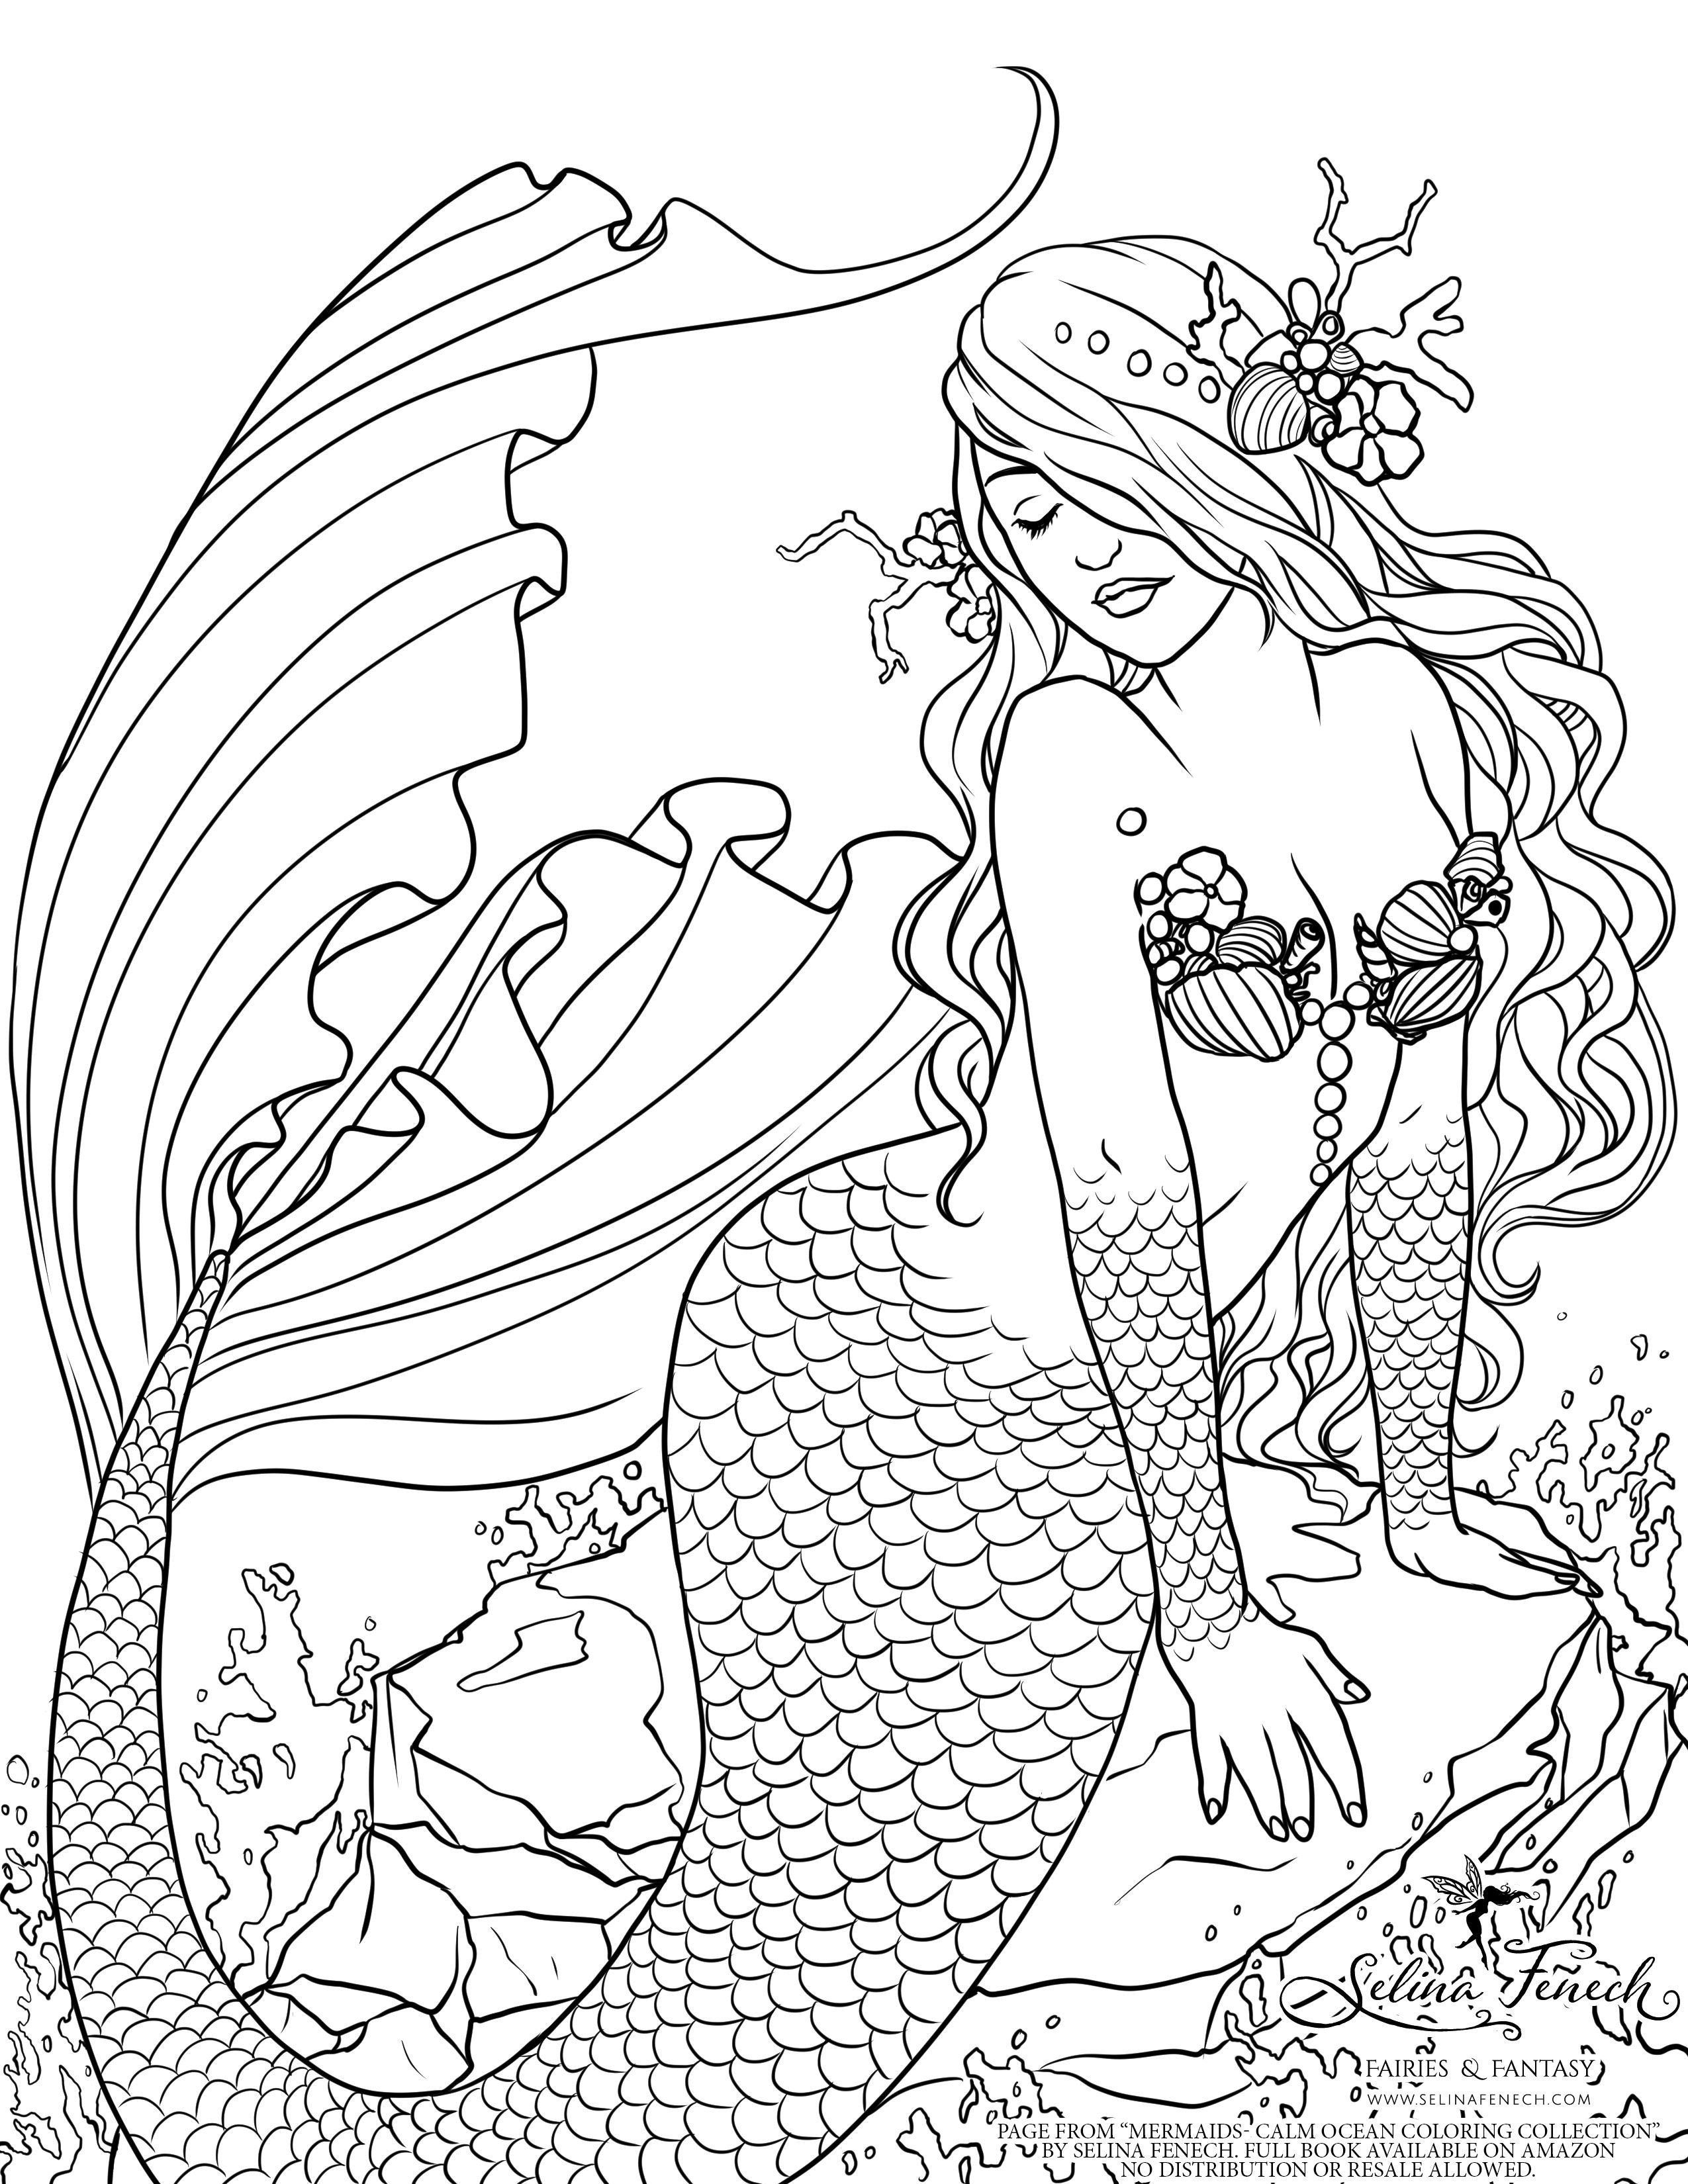 Coloring Pages For Toddlers Mermaid
 Mermaid colouring page by Selina Fenech shared by her